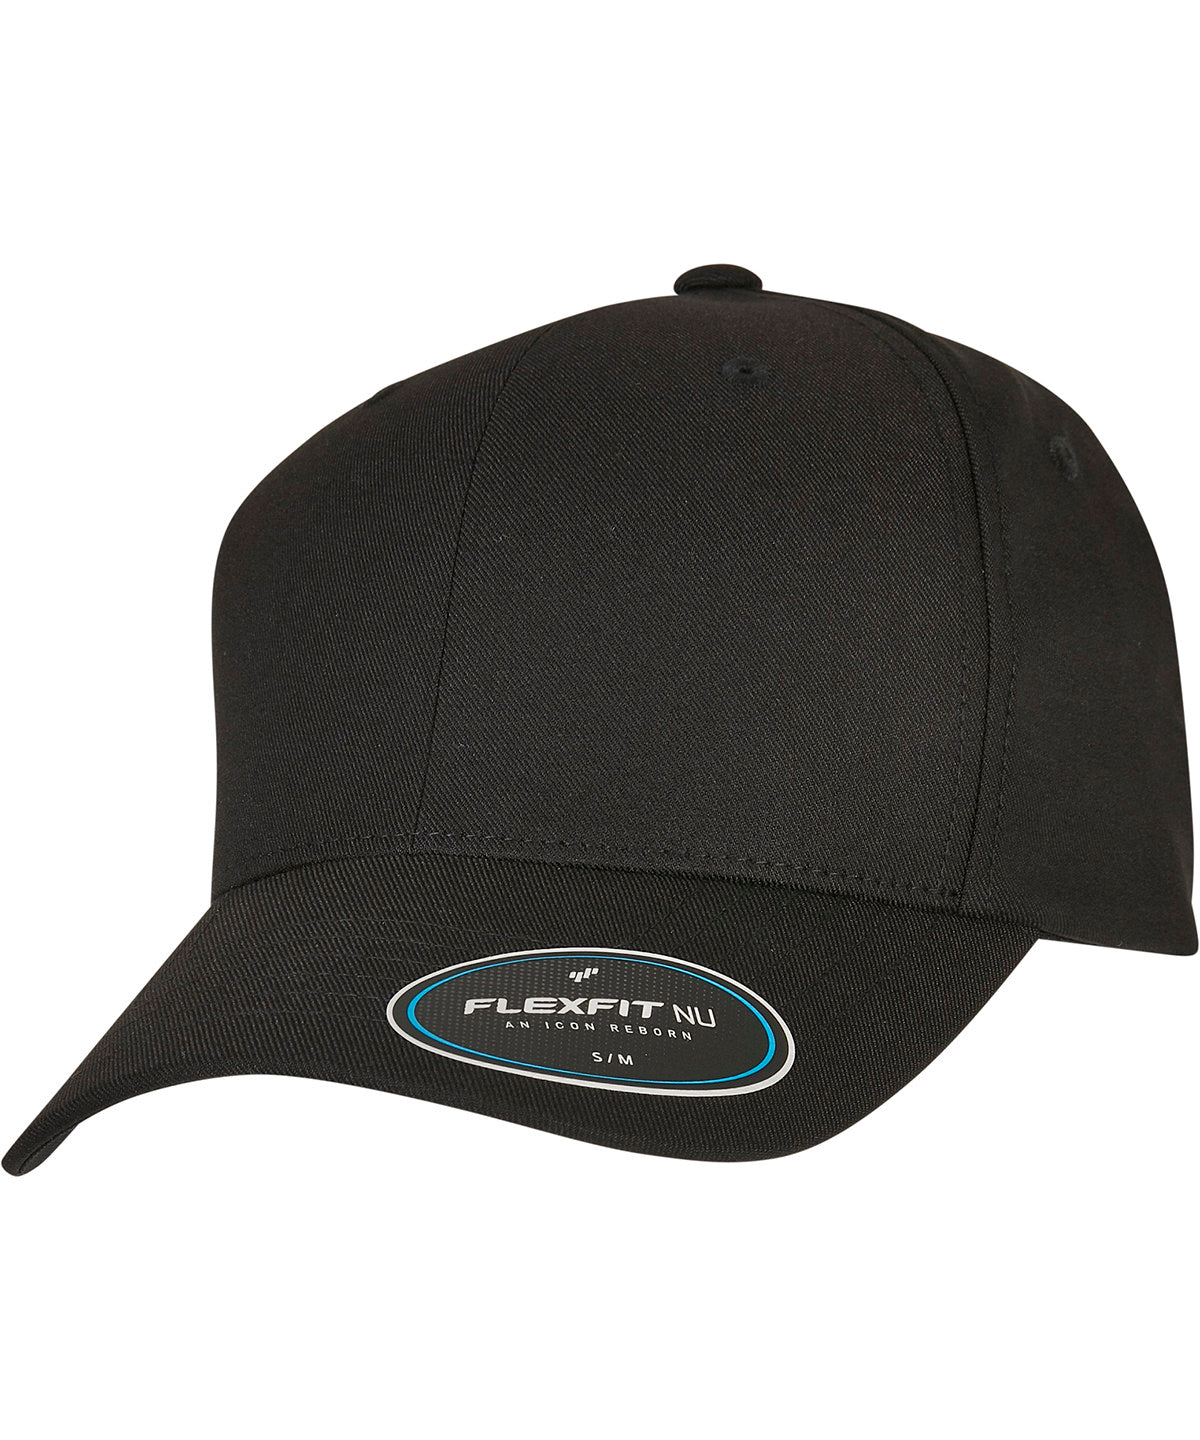 Embroidered Flexfit by Yupoong Caps & Hats with your brand logo, FAST! –  Teeone